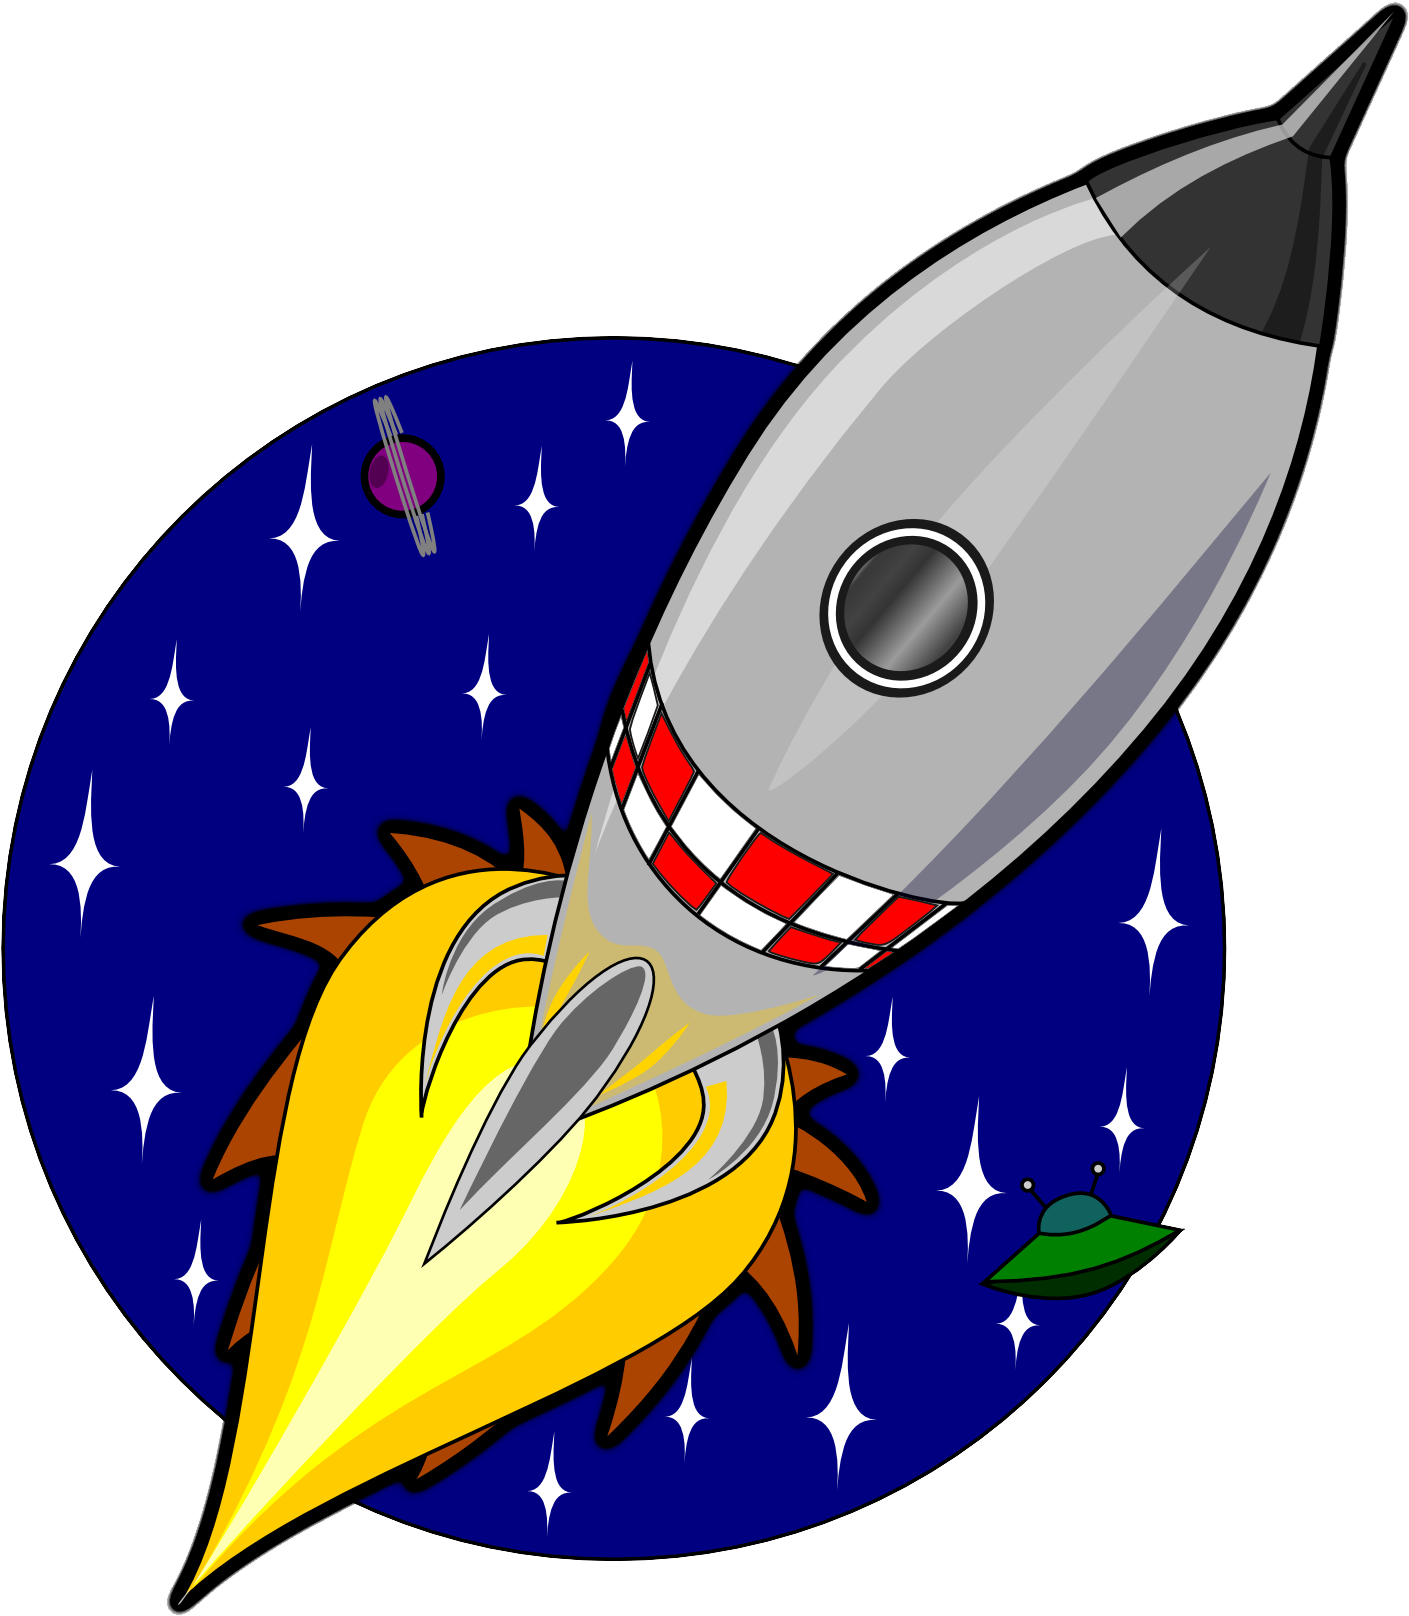 Outer Space Free Content Space Science Clip Art - Outer Space Free Content Space Science Clip Art (1615x1920)